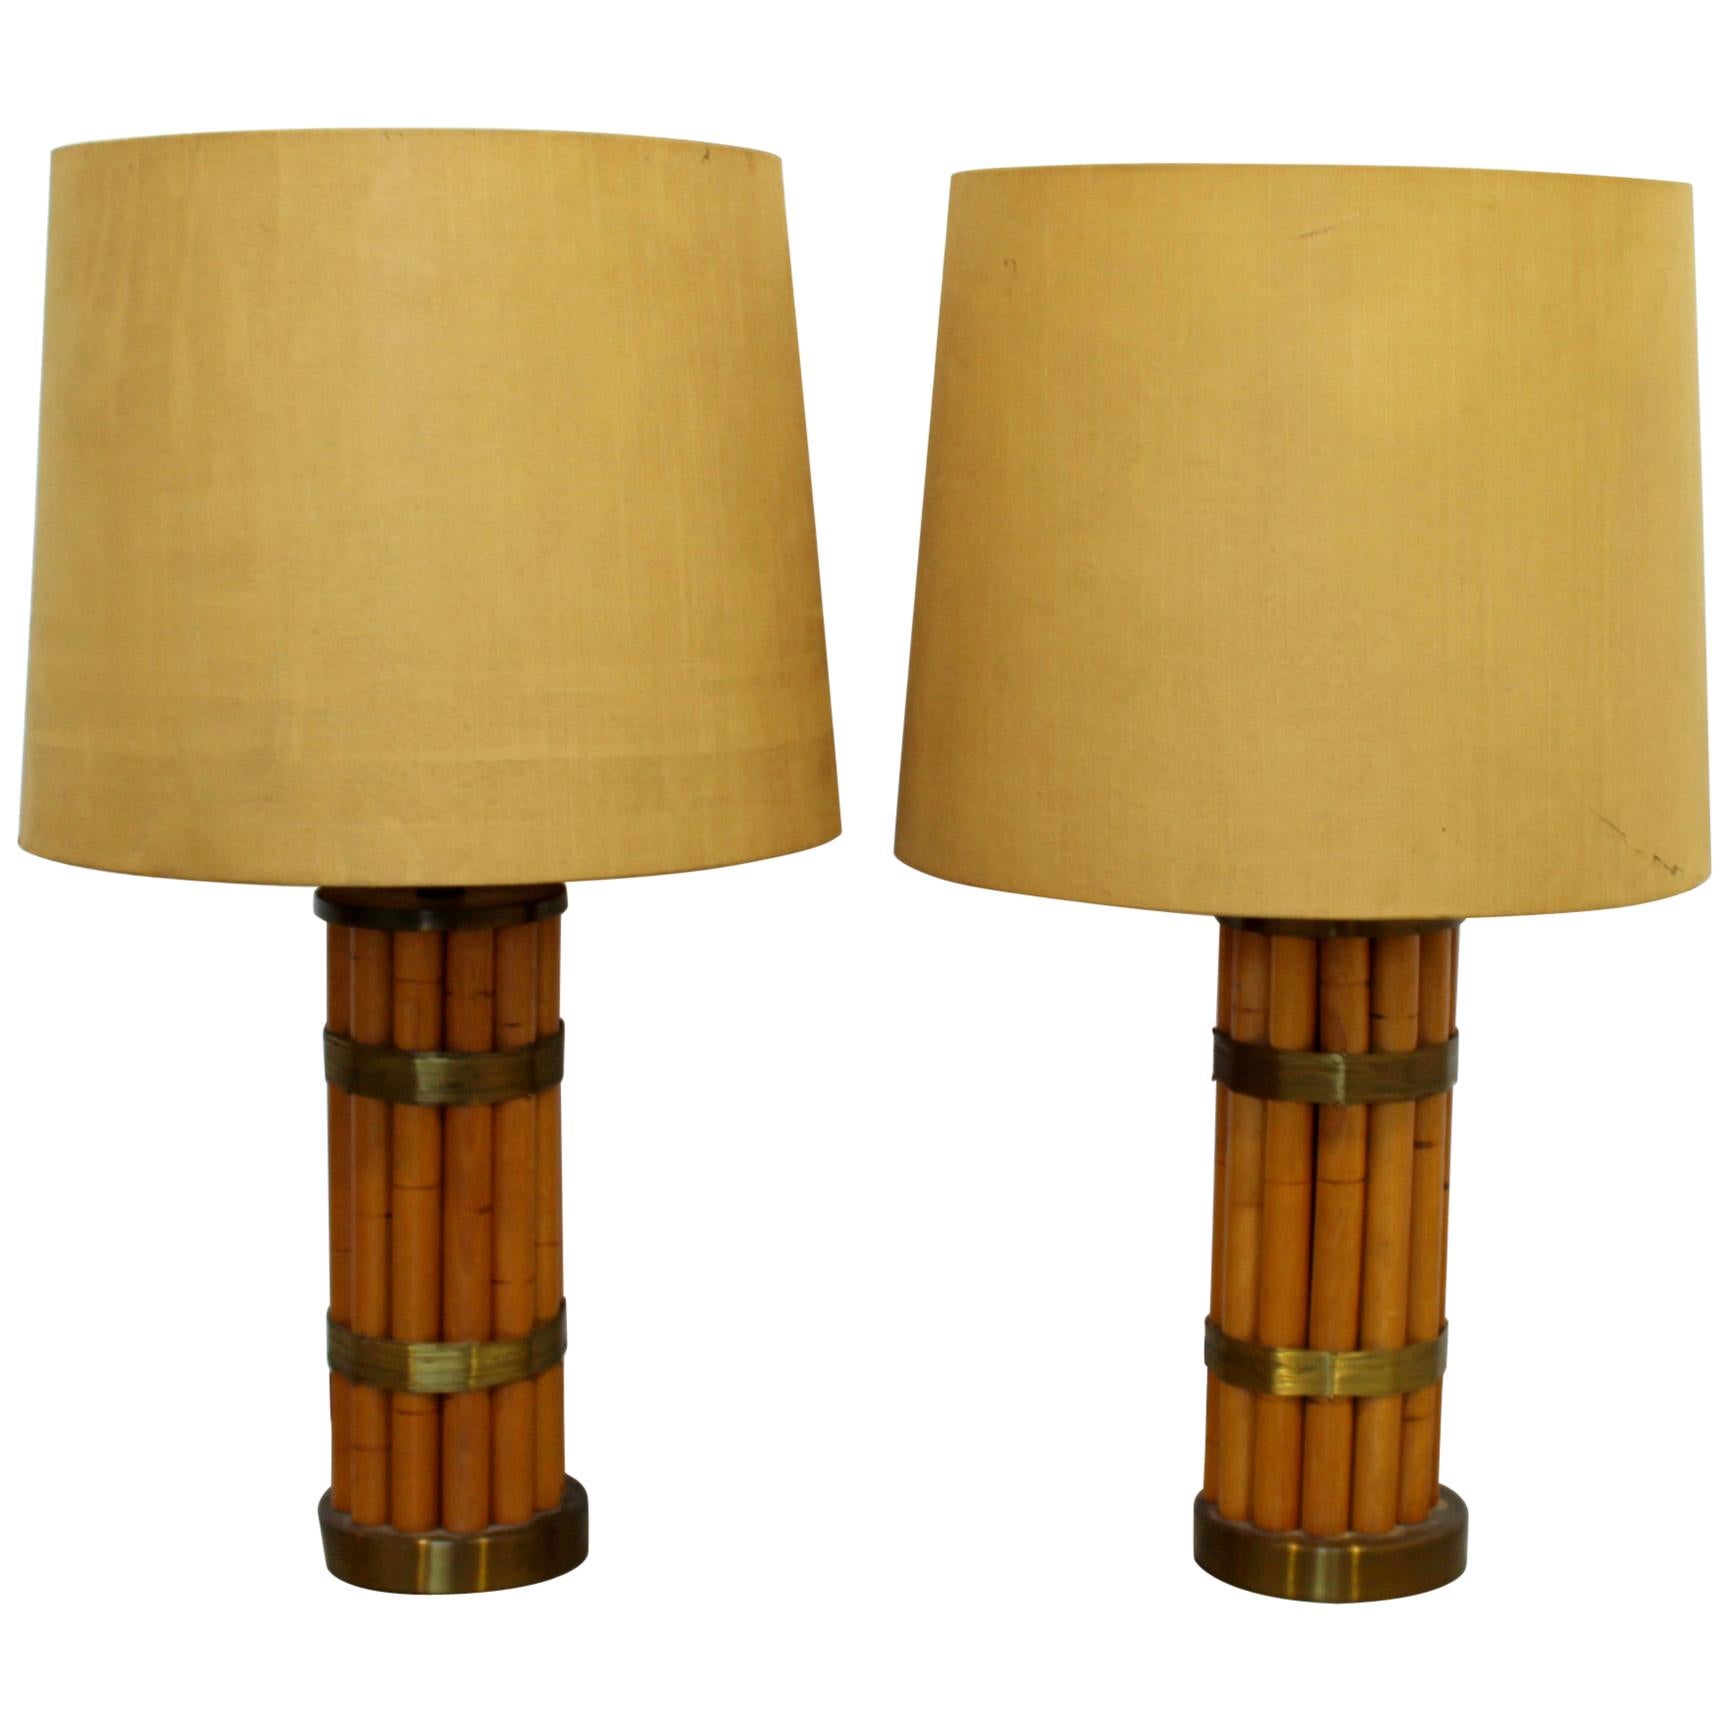 Mid-Century Modern Early Russell Wright Pair of Bamboo & Brass Table Lamps 1950s